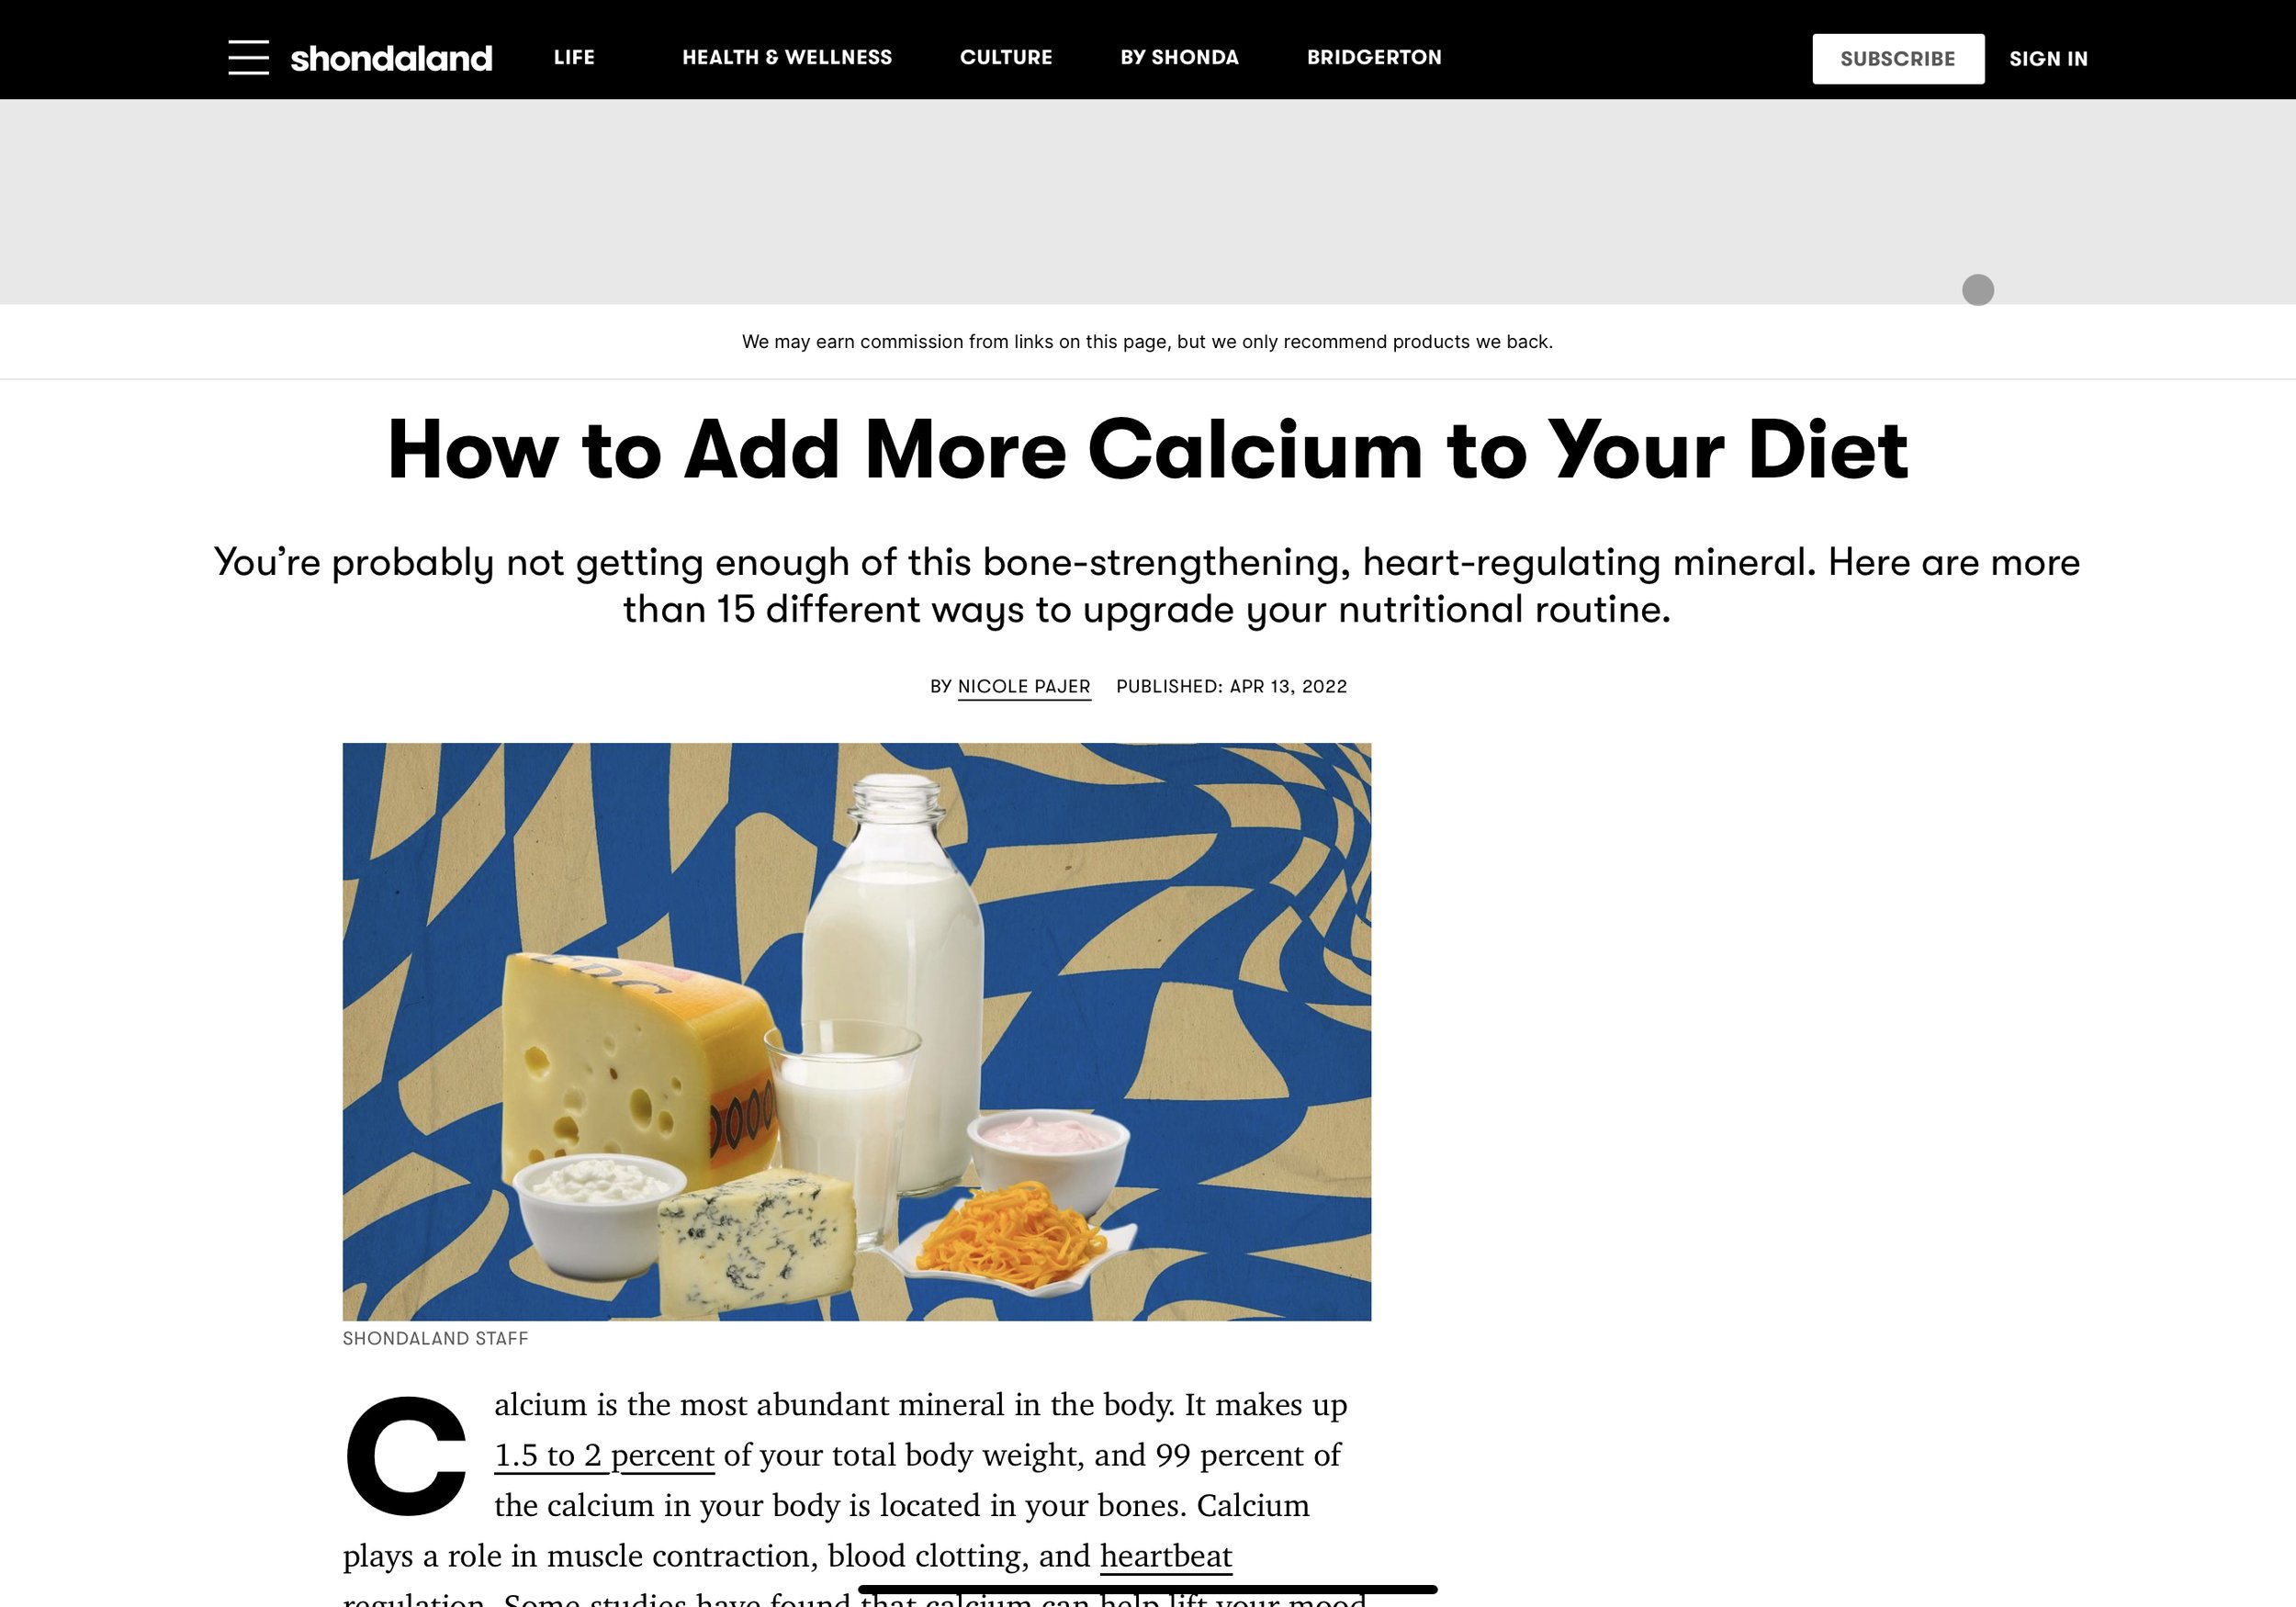 VFit Studio's Lauren Ferrara, RD featured in Shondaland about how to add more calcium to your diet